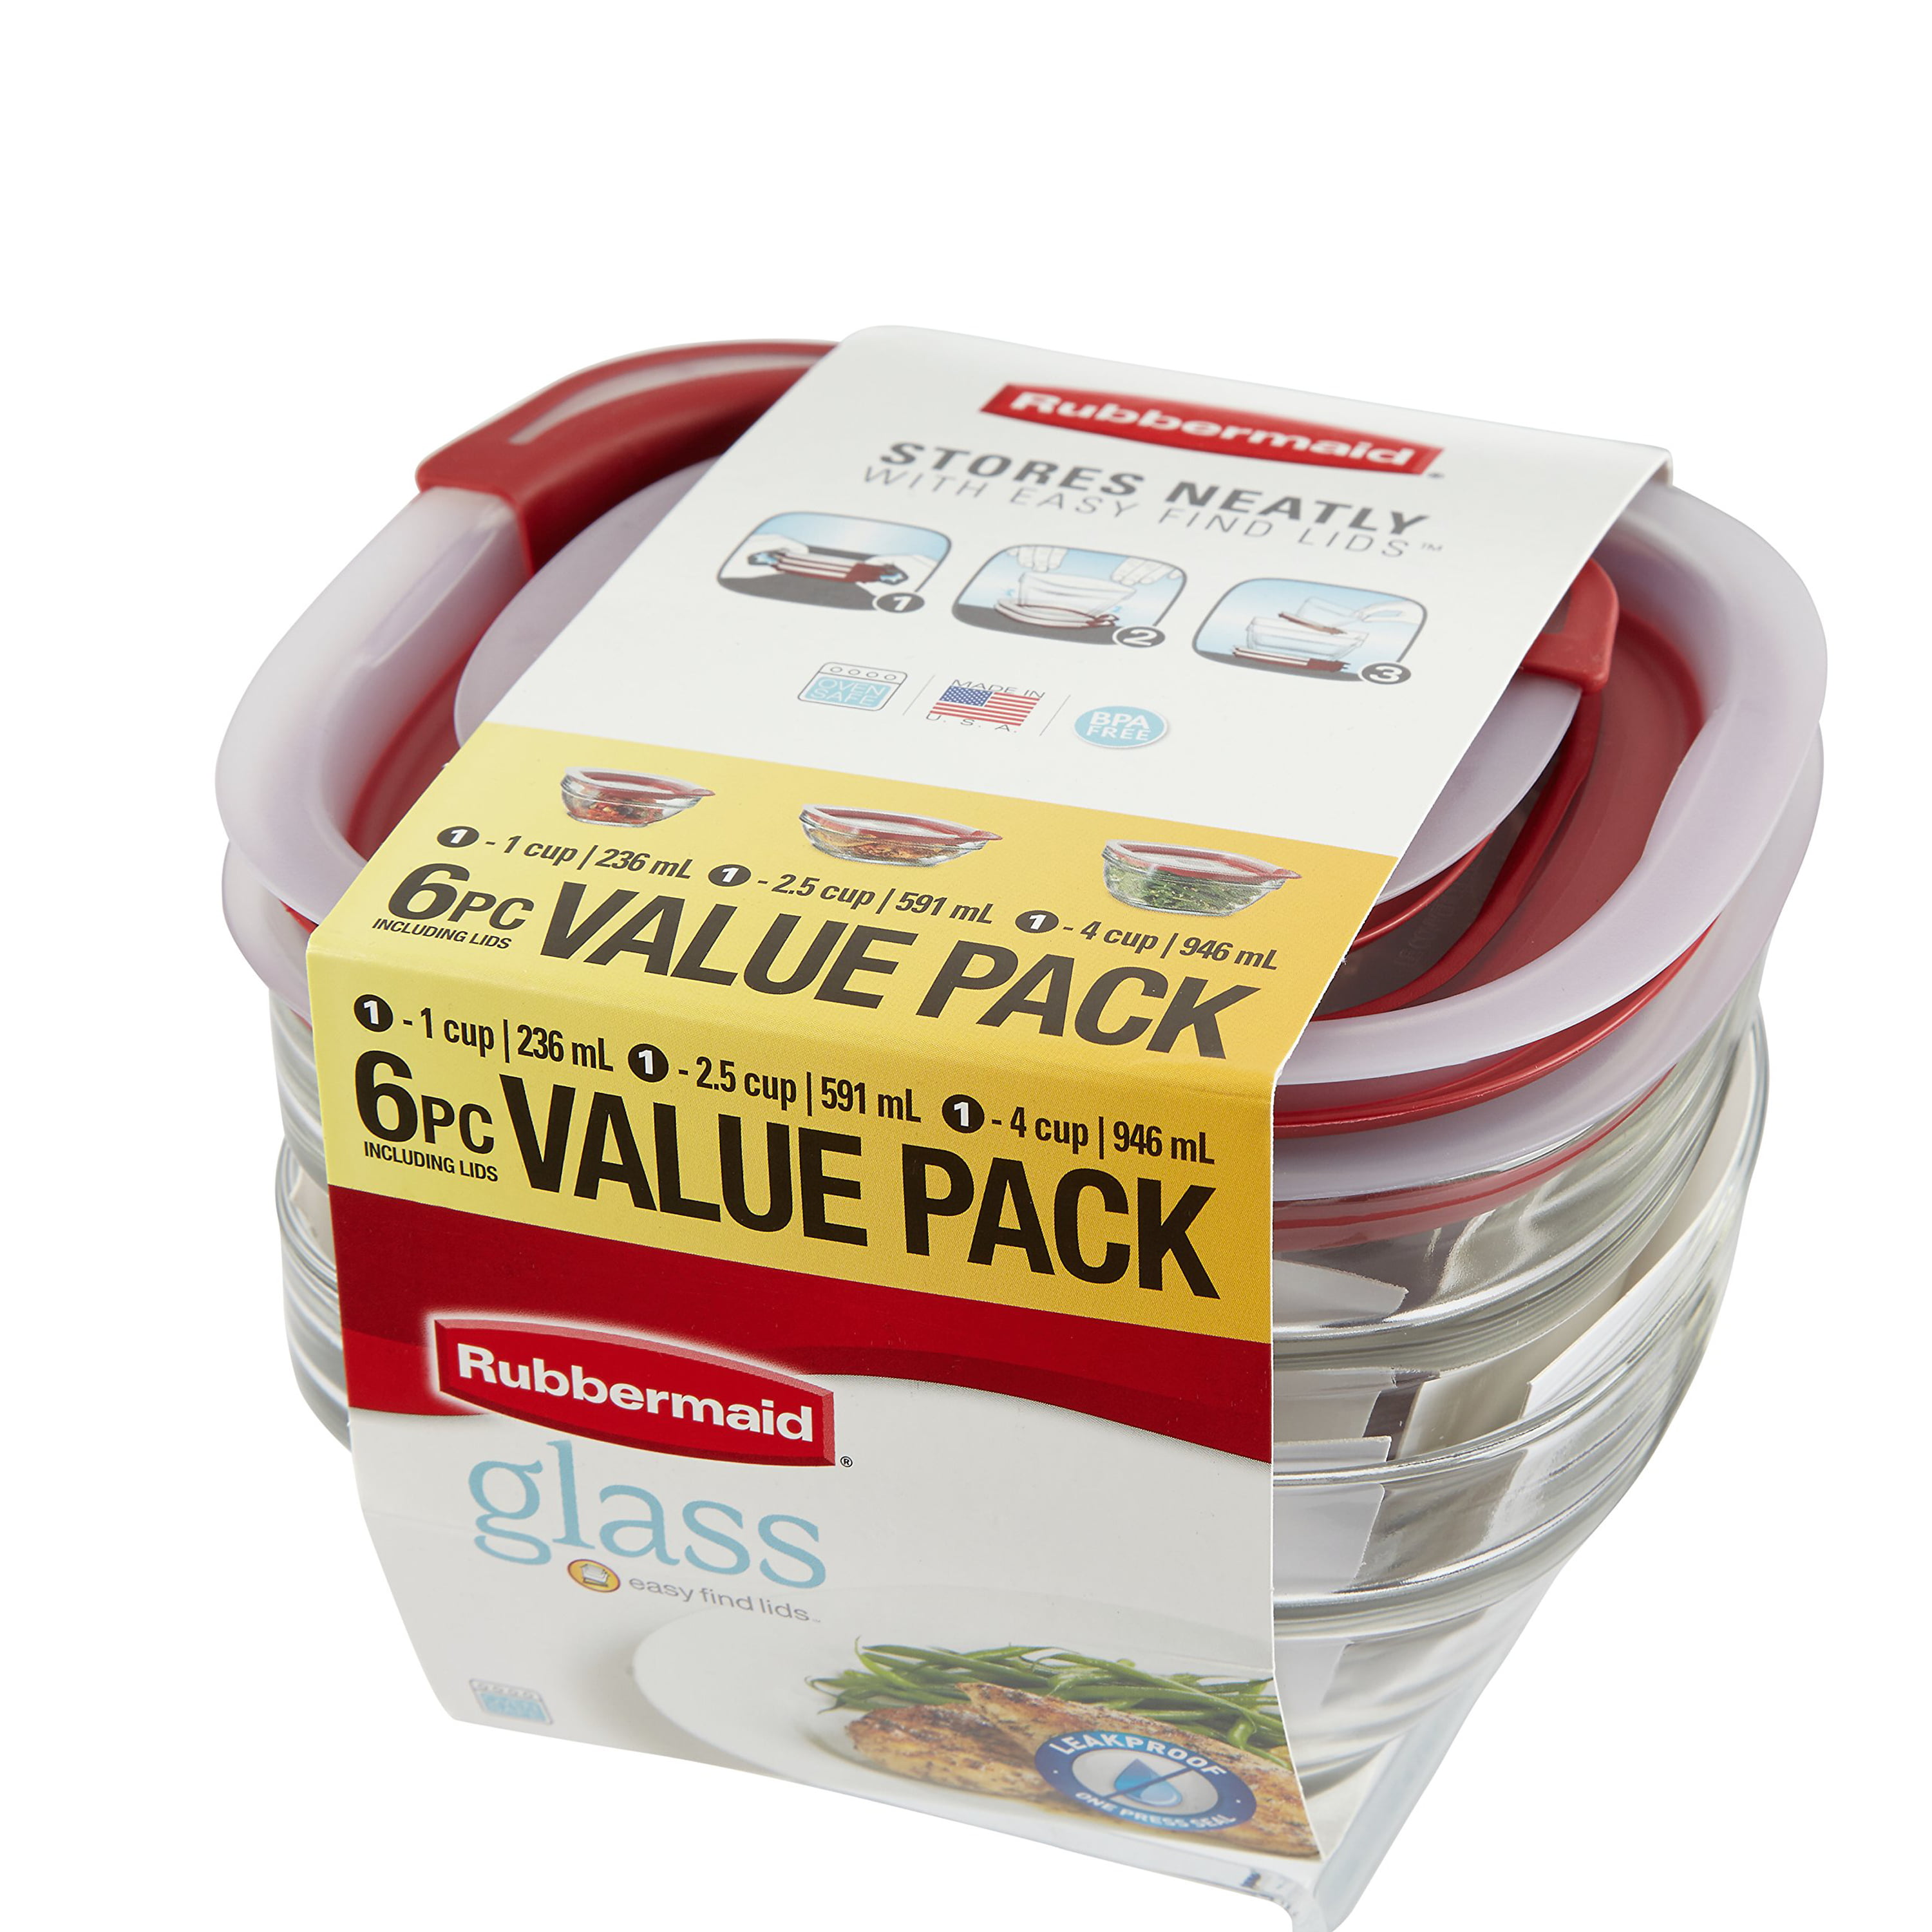  Rubbermaid Easy Find Lids Glass Food Storage and Meal Prep  Containers, Set of 11 (22 Pieces Total) : Everything Else